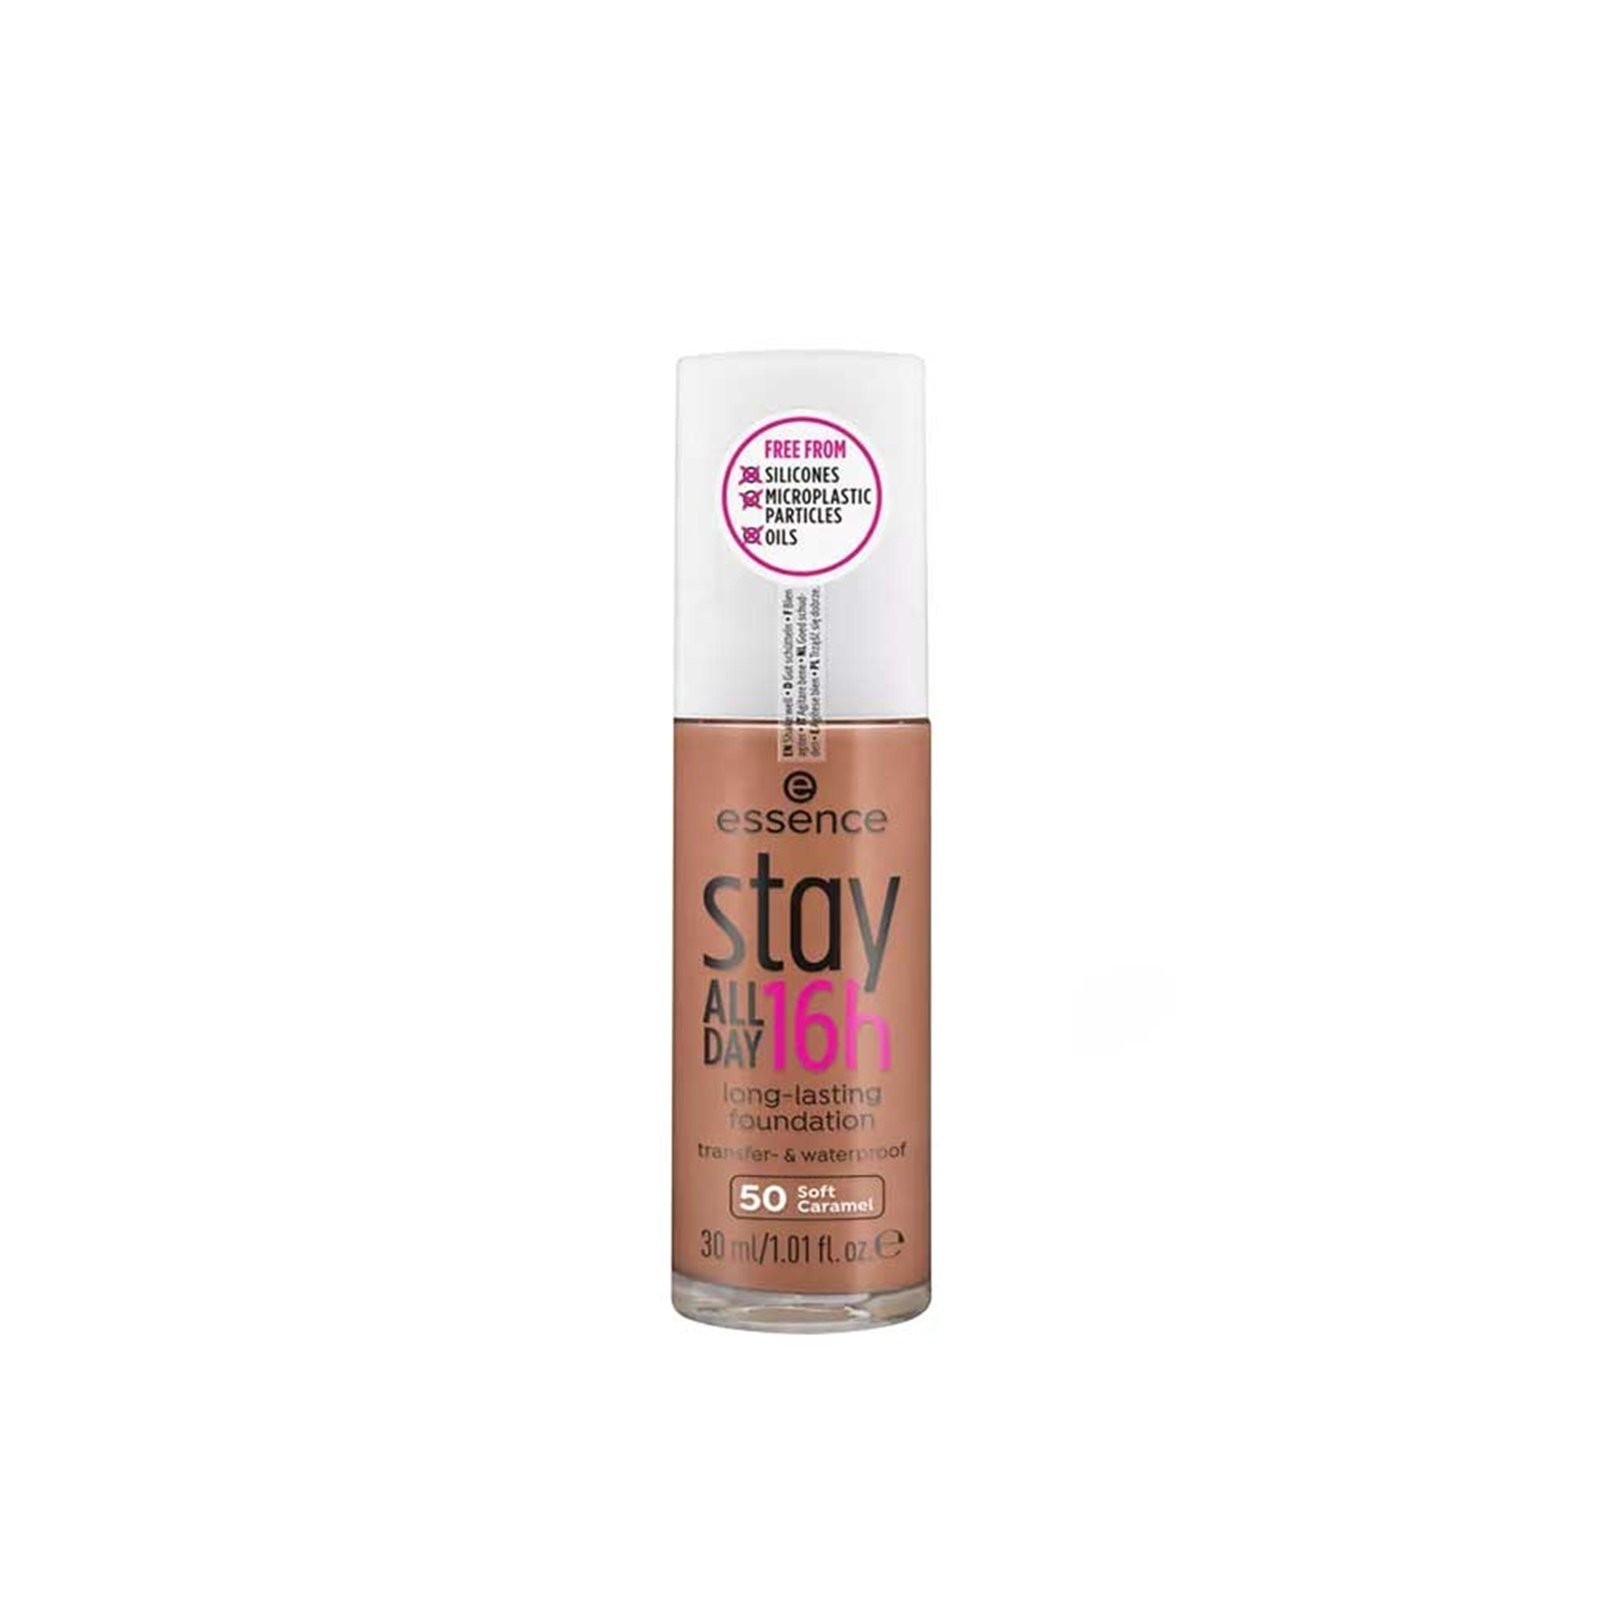 All essence 16h · Long-Lasting Foundation USA Stay Day Buy